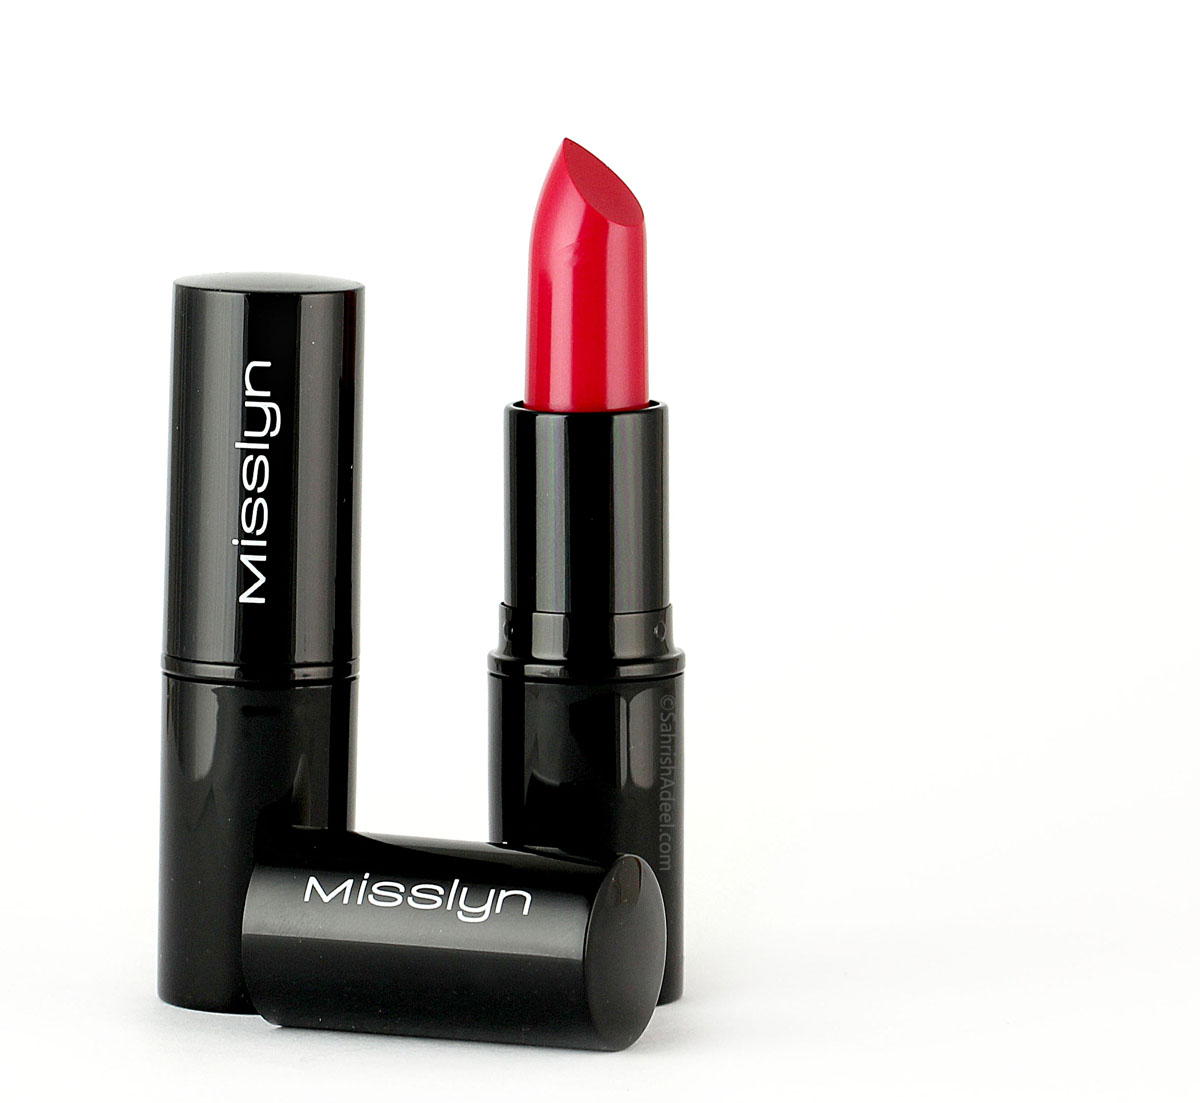 Lipsticks by Misslyn - Review & Swatches